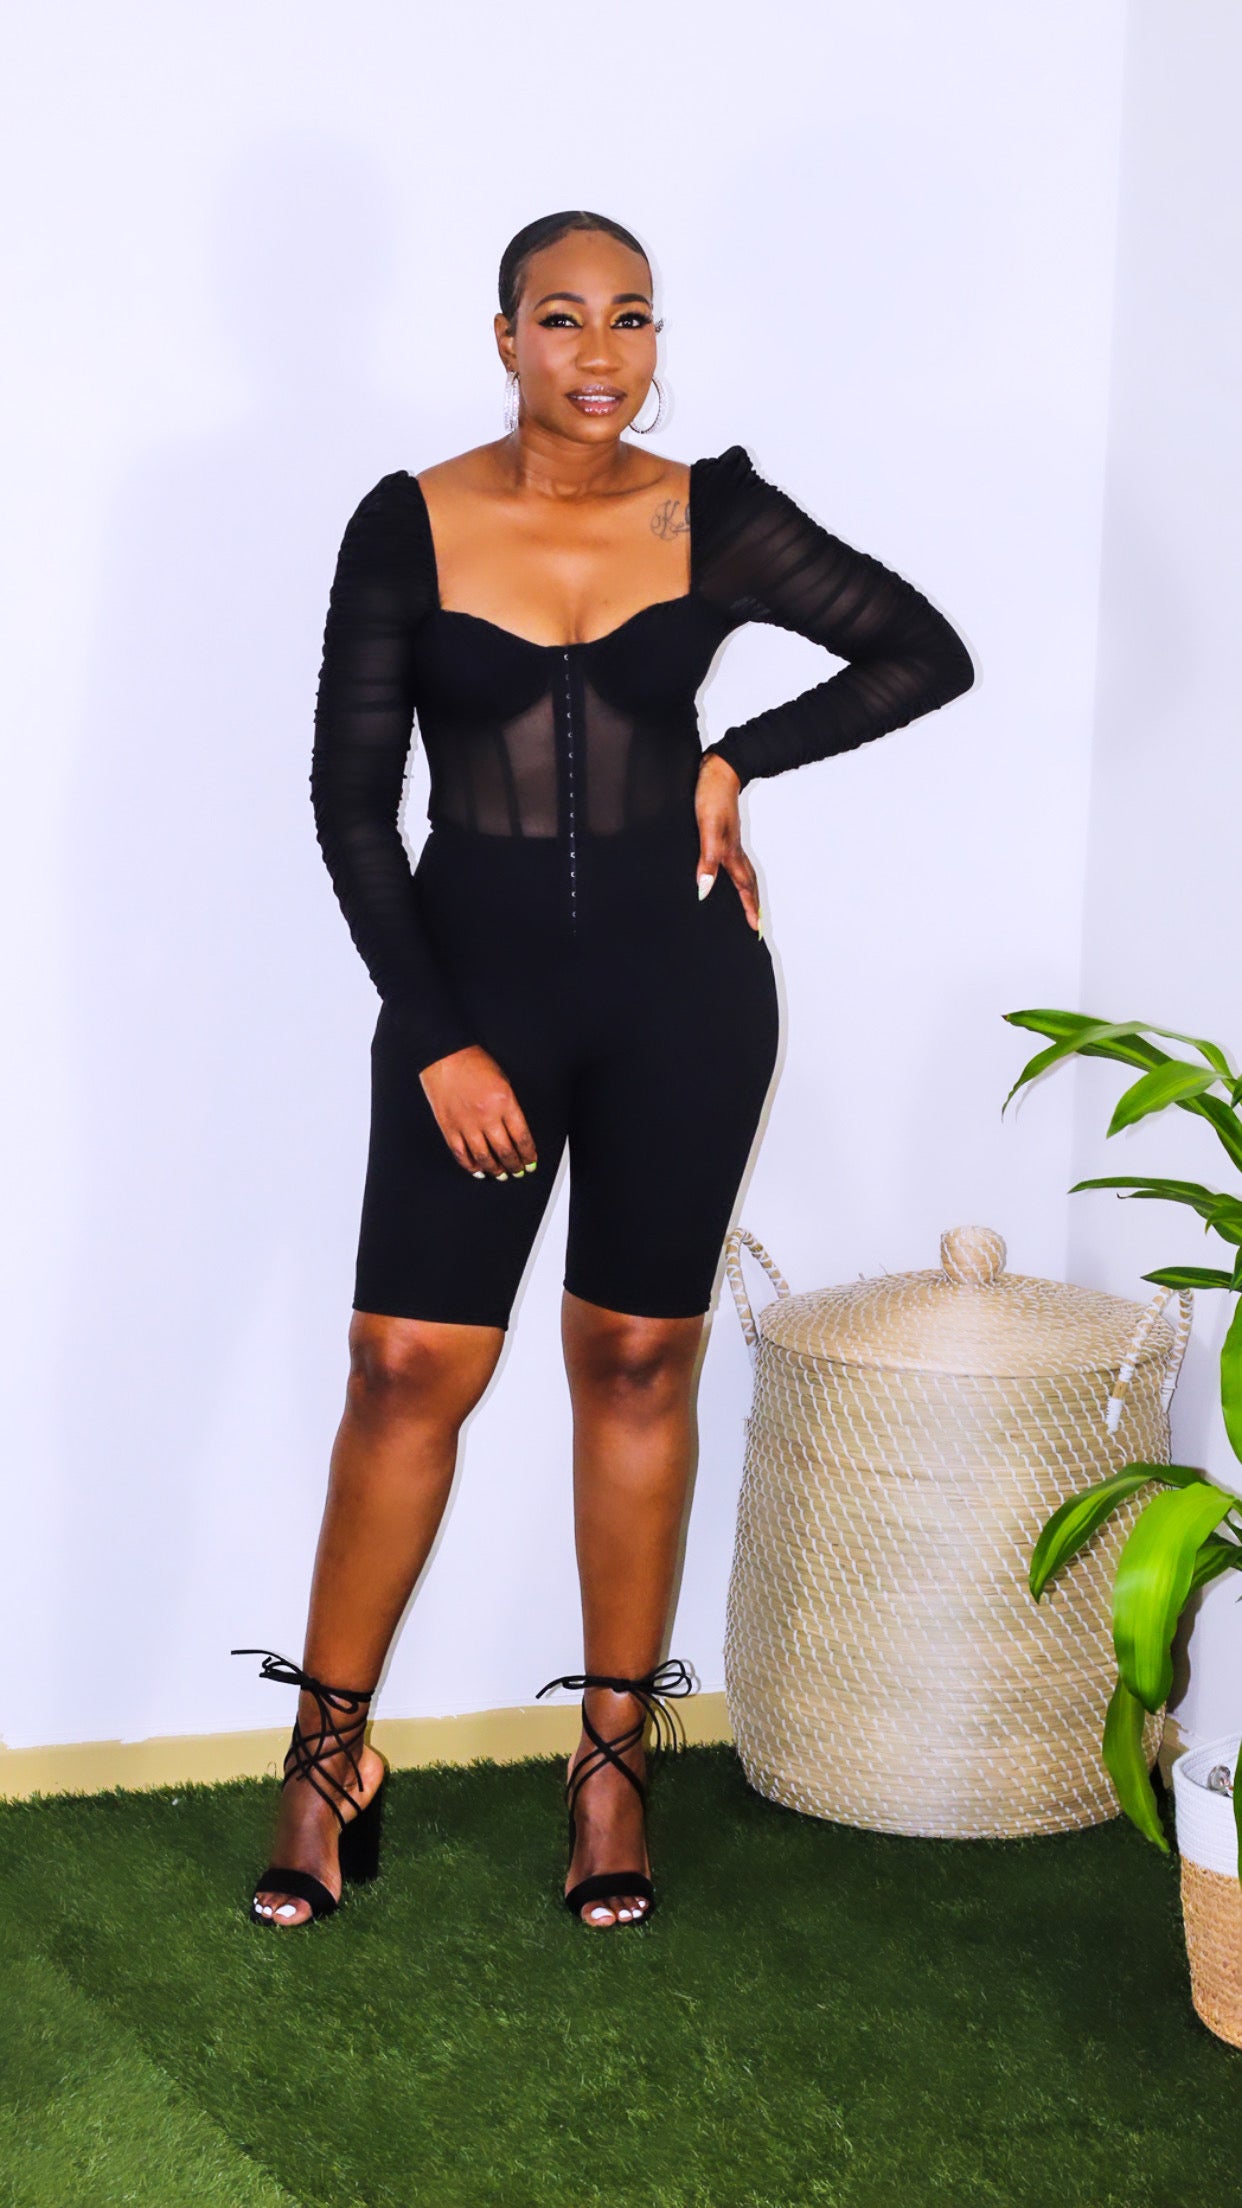 Illusion Romper is sheer with long sleeves on top with a legging style bottom. Front has a hooked closure with sweetheart neckline. Illusion has amazing stretch and is a definitely a showstopper. 